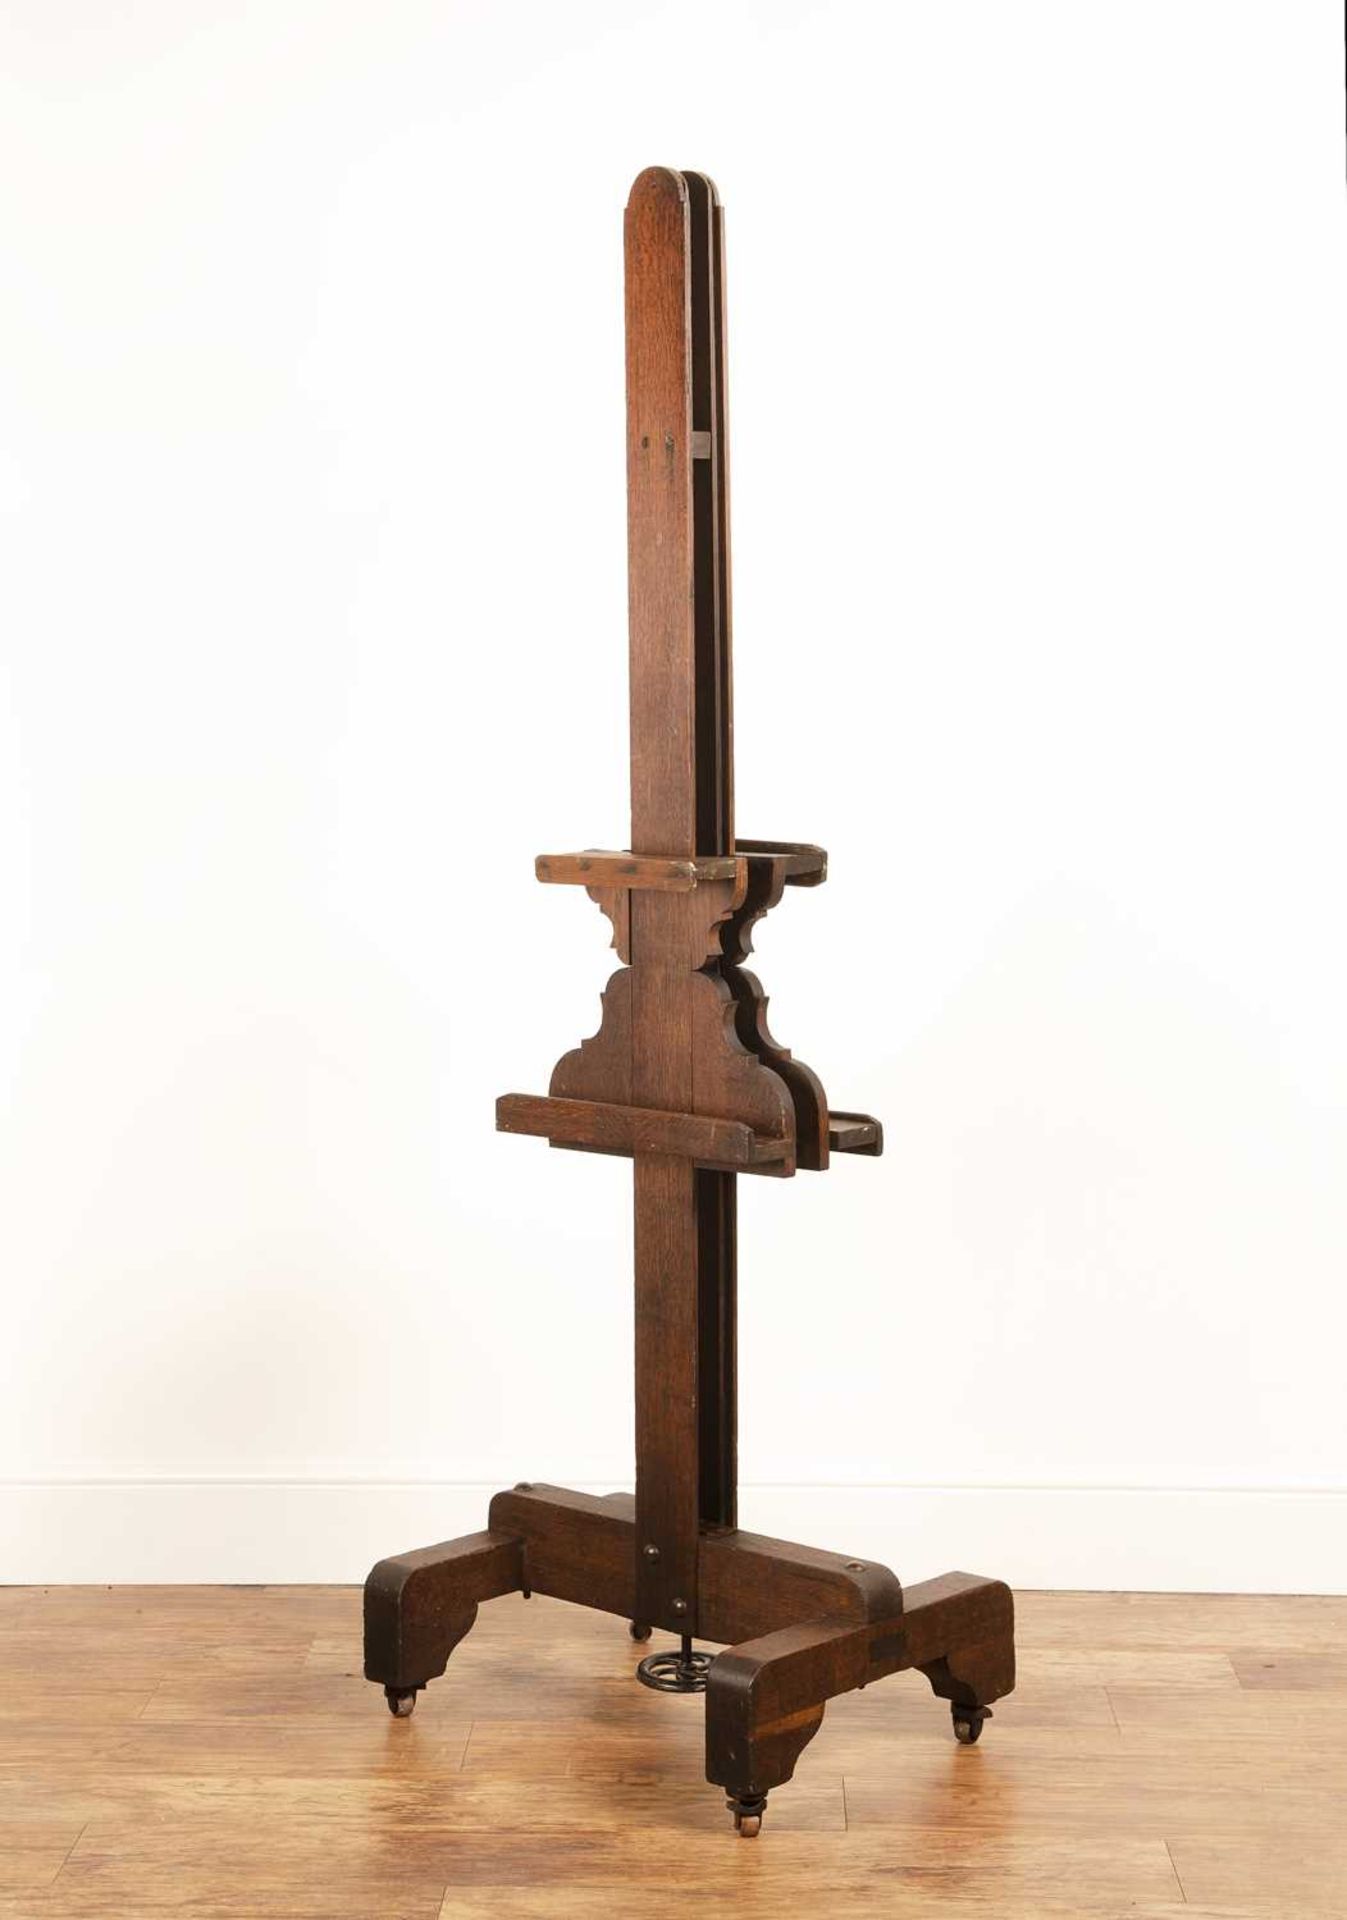 Oak artist's easel 19th Century, probably French, double-sided with adjustable height lever, 191cm - Image 2 of 2